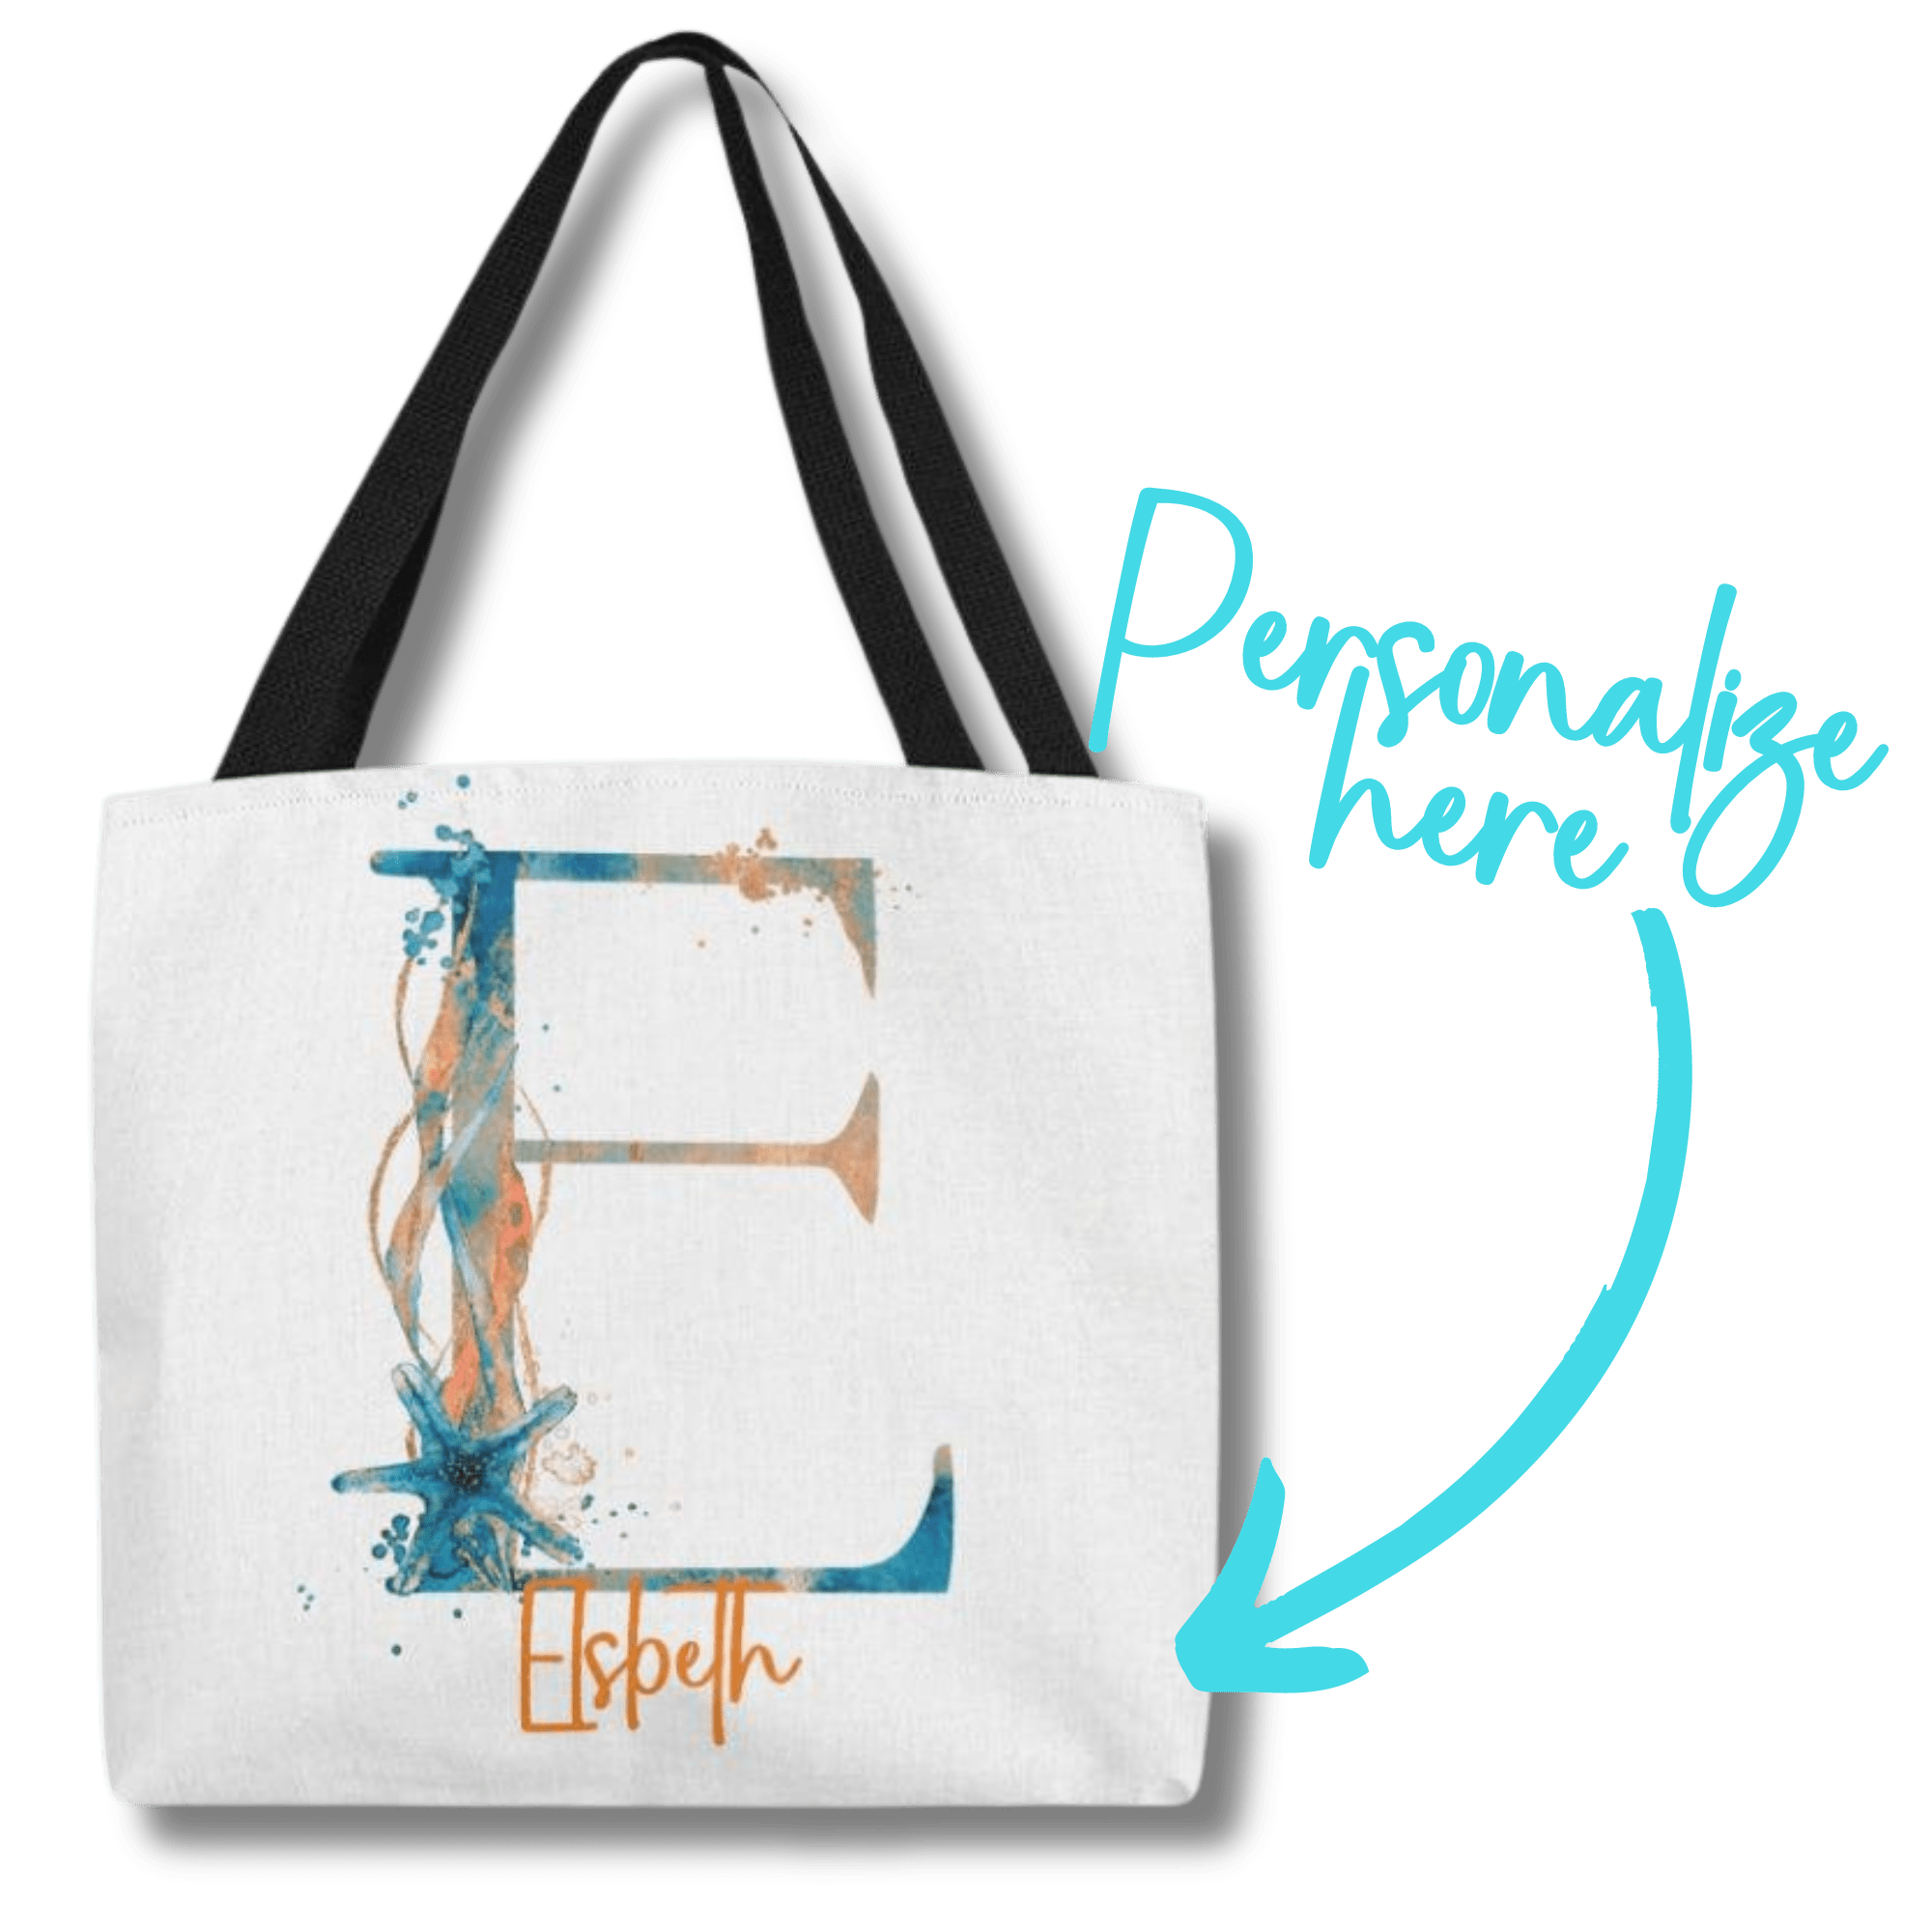 PERSONALIZABLE TOTE BAG | MONOGRAM - E | PERFECT GIFT for CO-WORKER, TEACHER, YOU